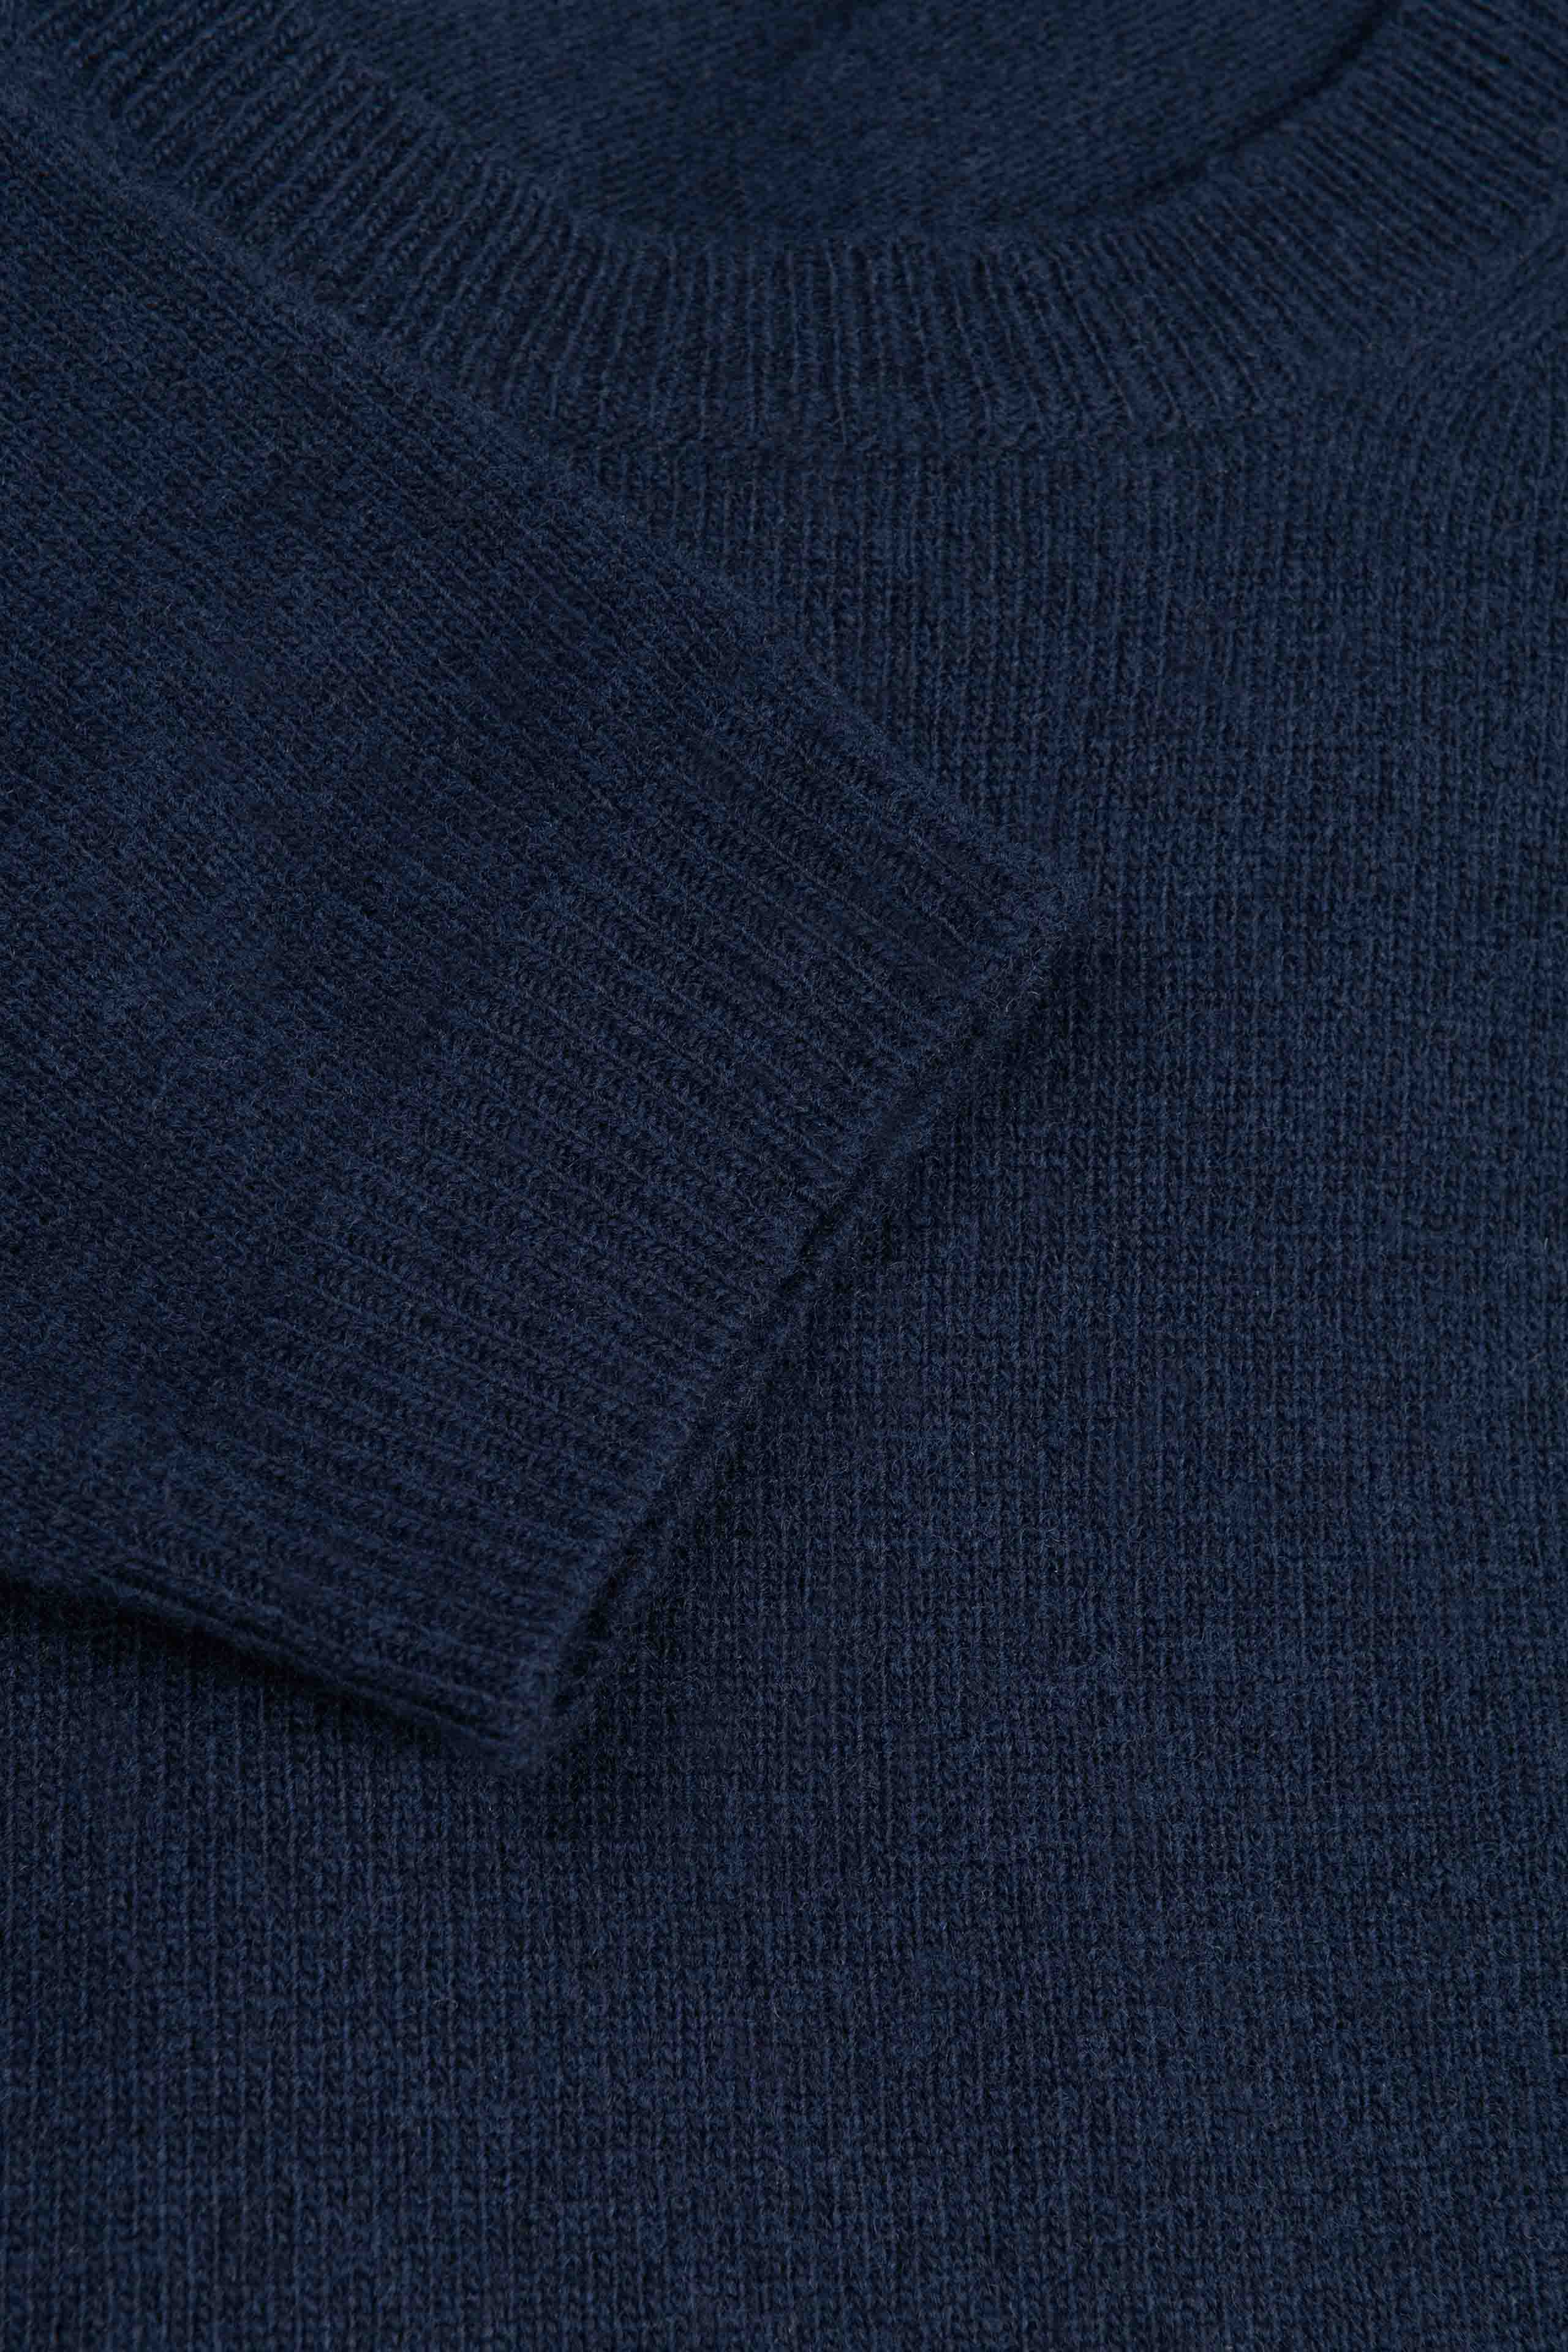 Wool and cashmere crewneck - BLUE